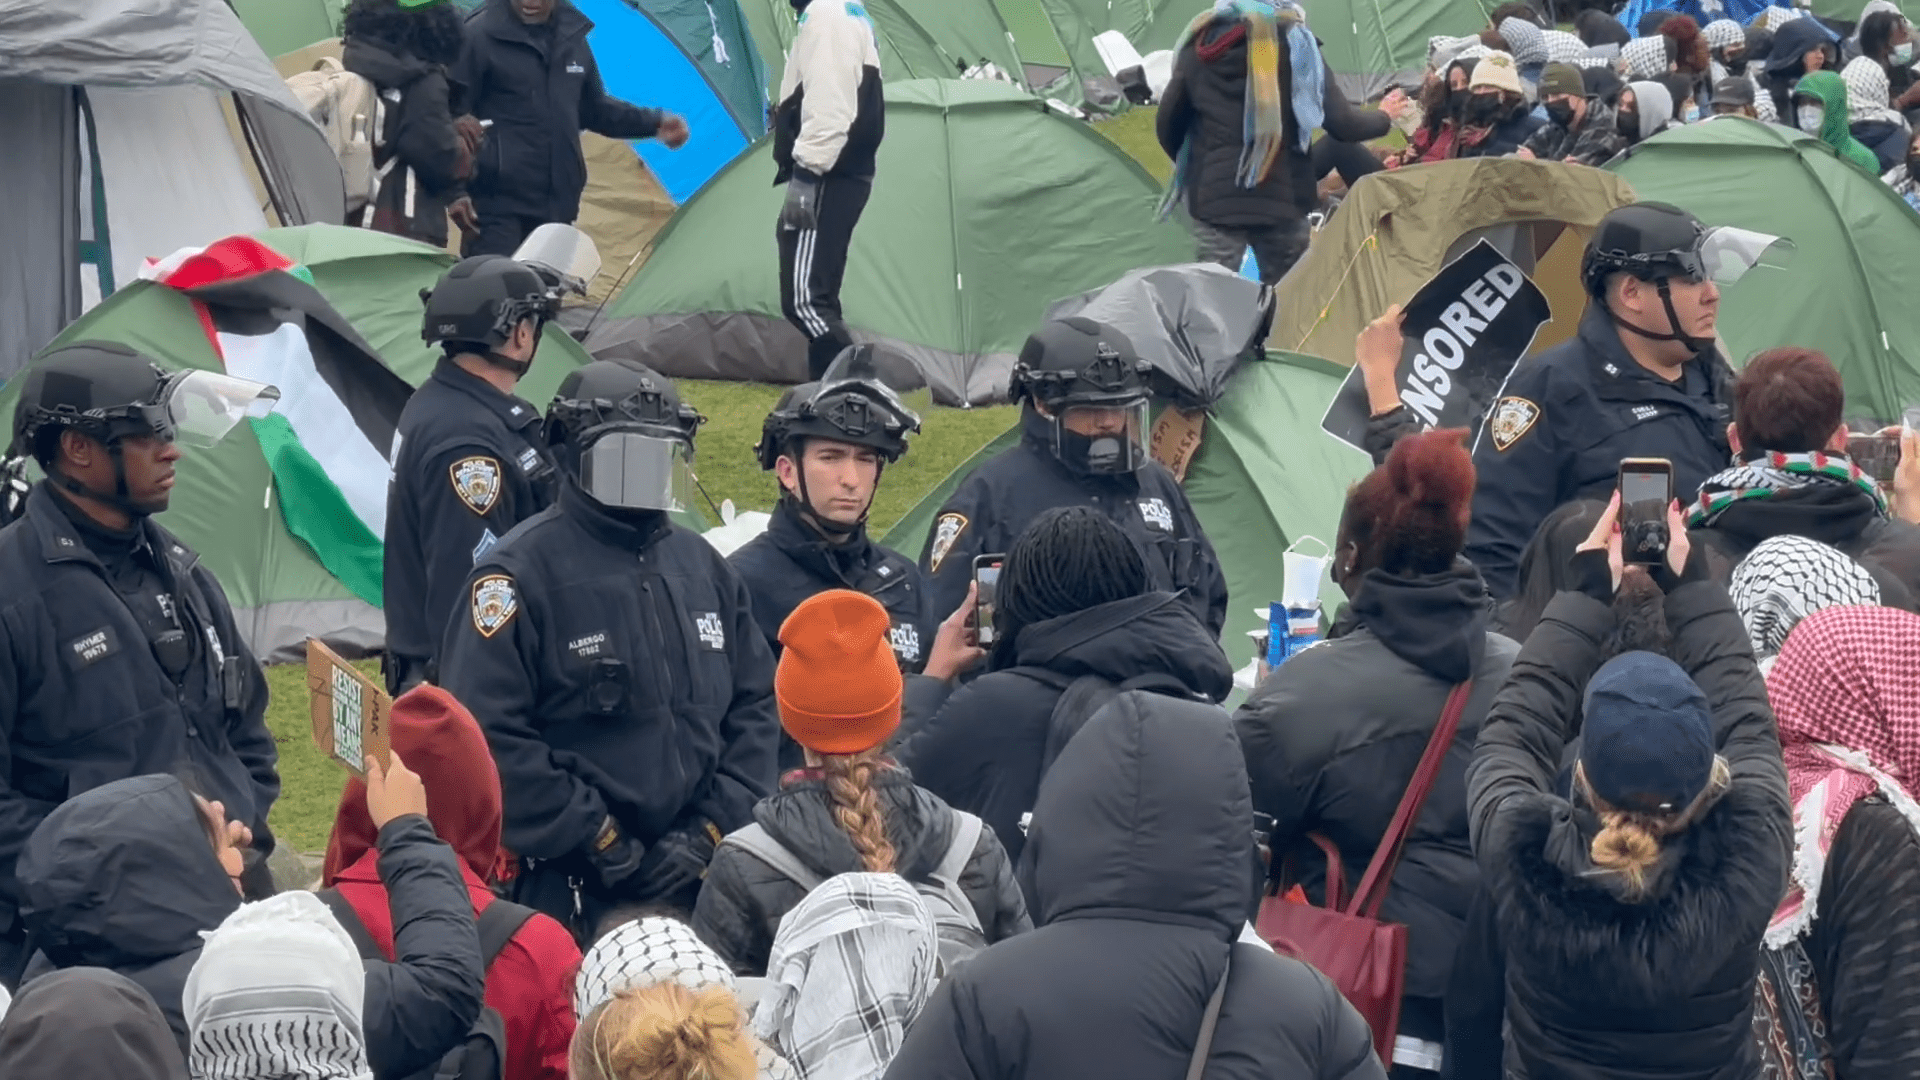 NYPD cops in riot gear at Columbia University protests (Video)